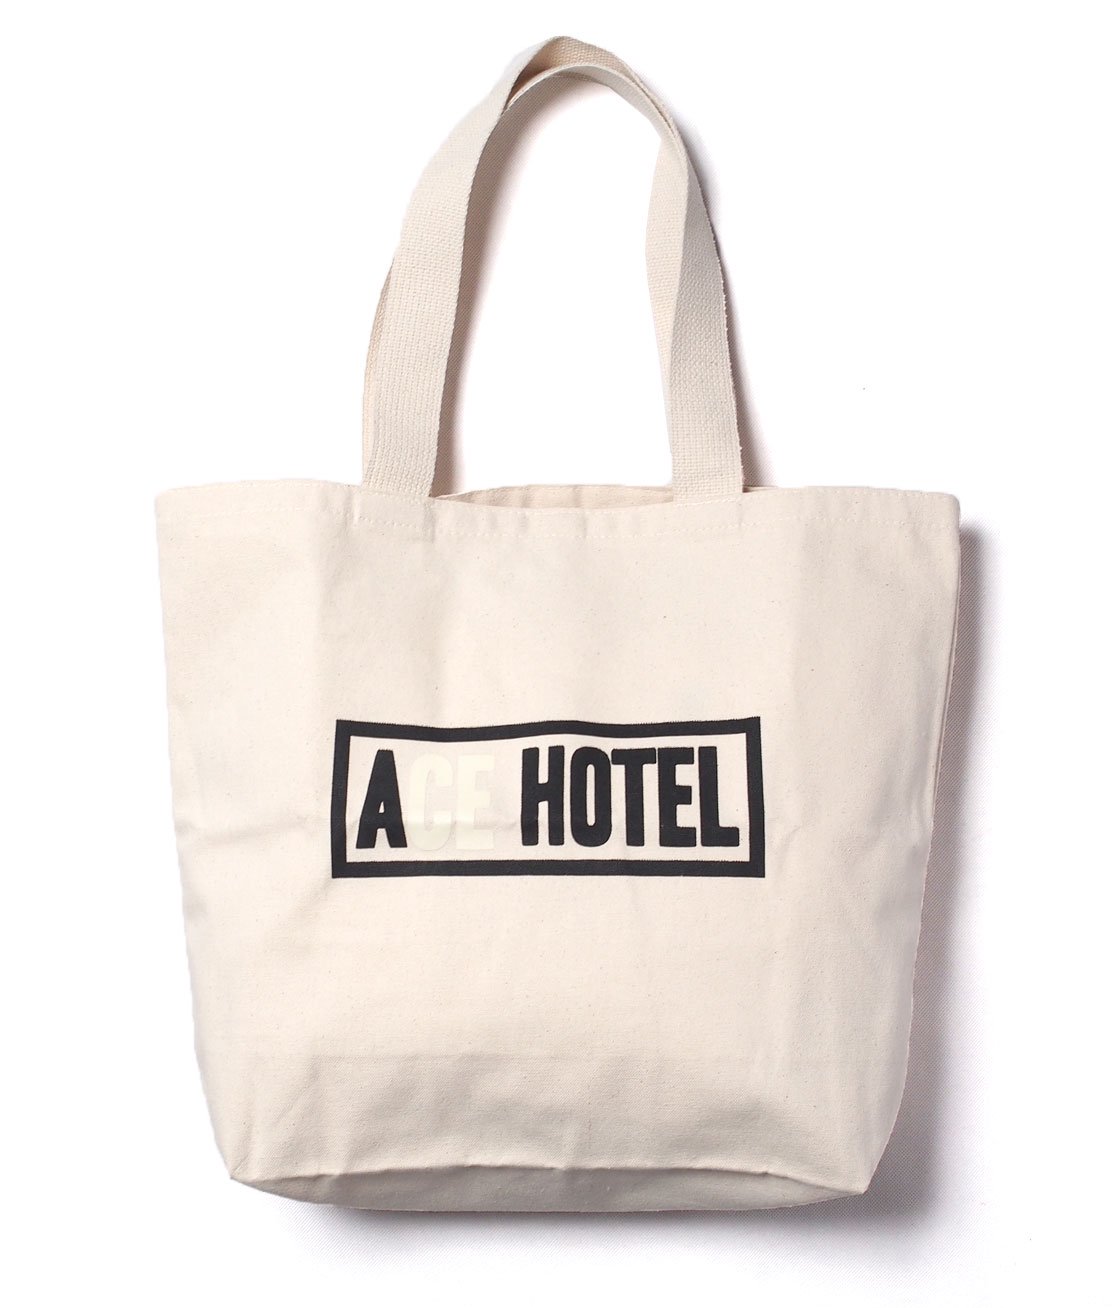 ACE HOTEL】A HOTEL TOTE - NATURAL トートバッグ - HUNKY DORY